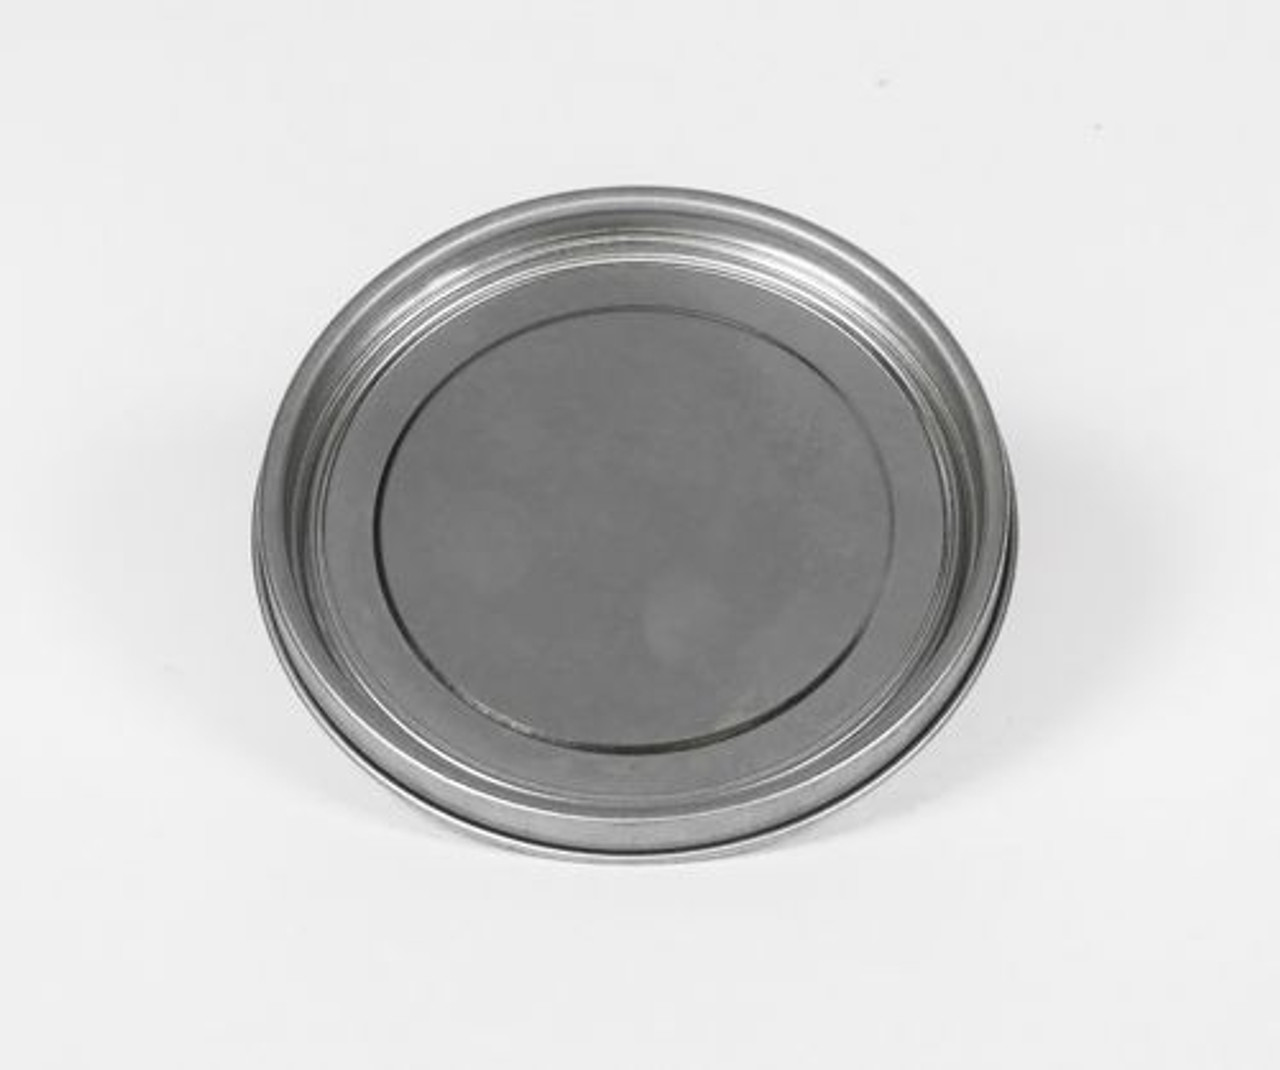 ½ GALLON UNLINED METAL PAINT CAN LID